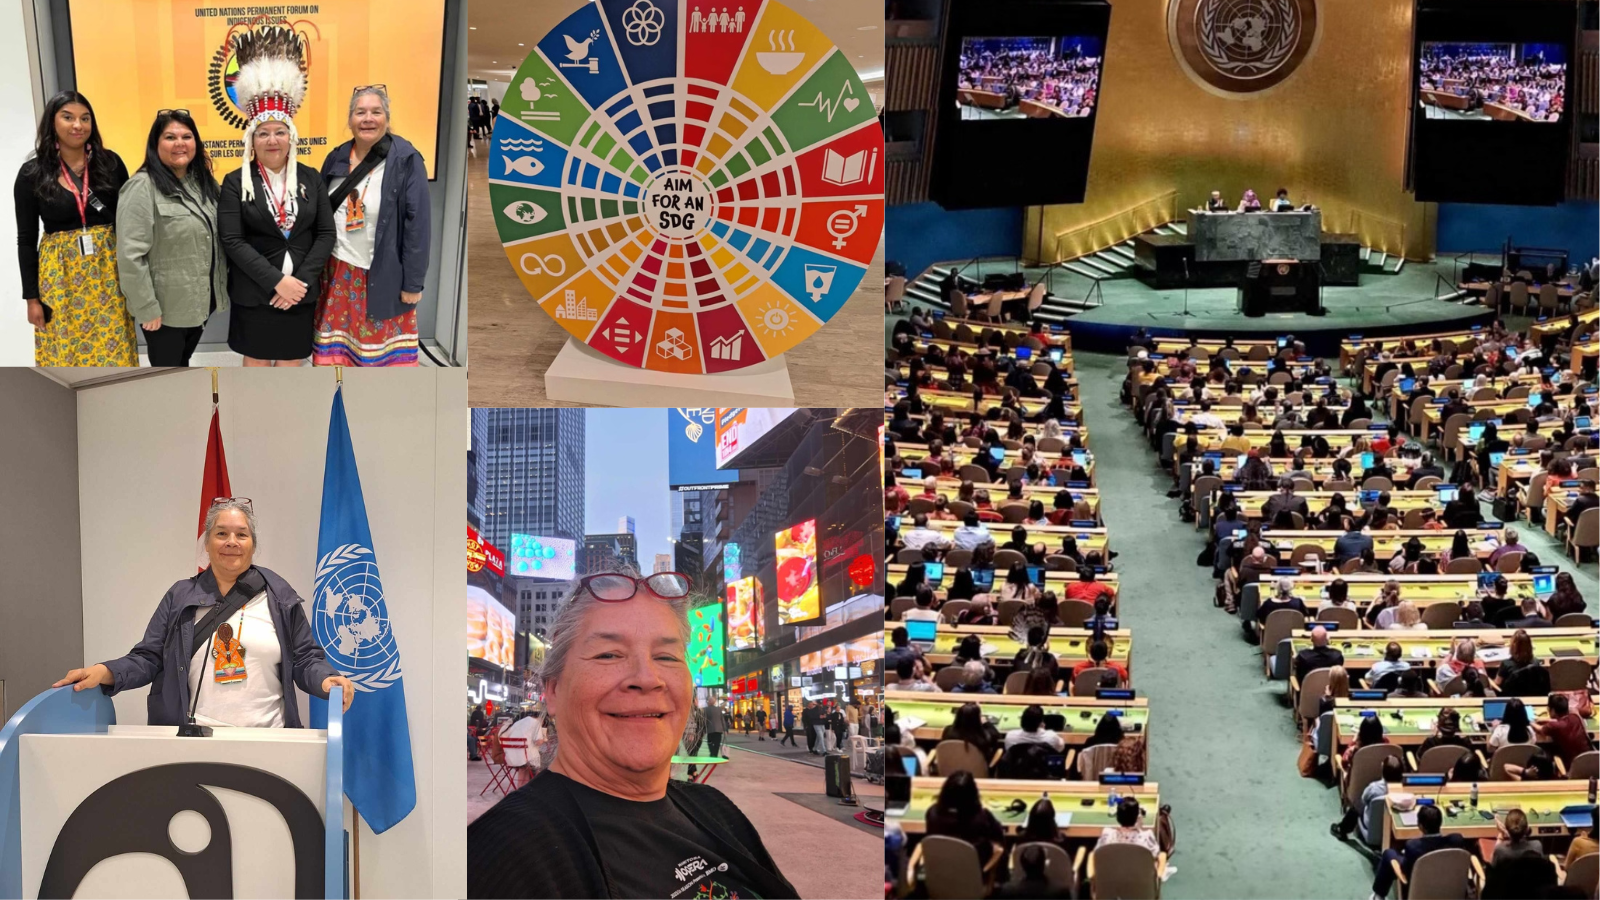 Cheryl’s Journey: Advocating for Youth at the United Nations